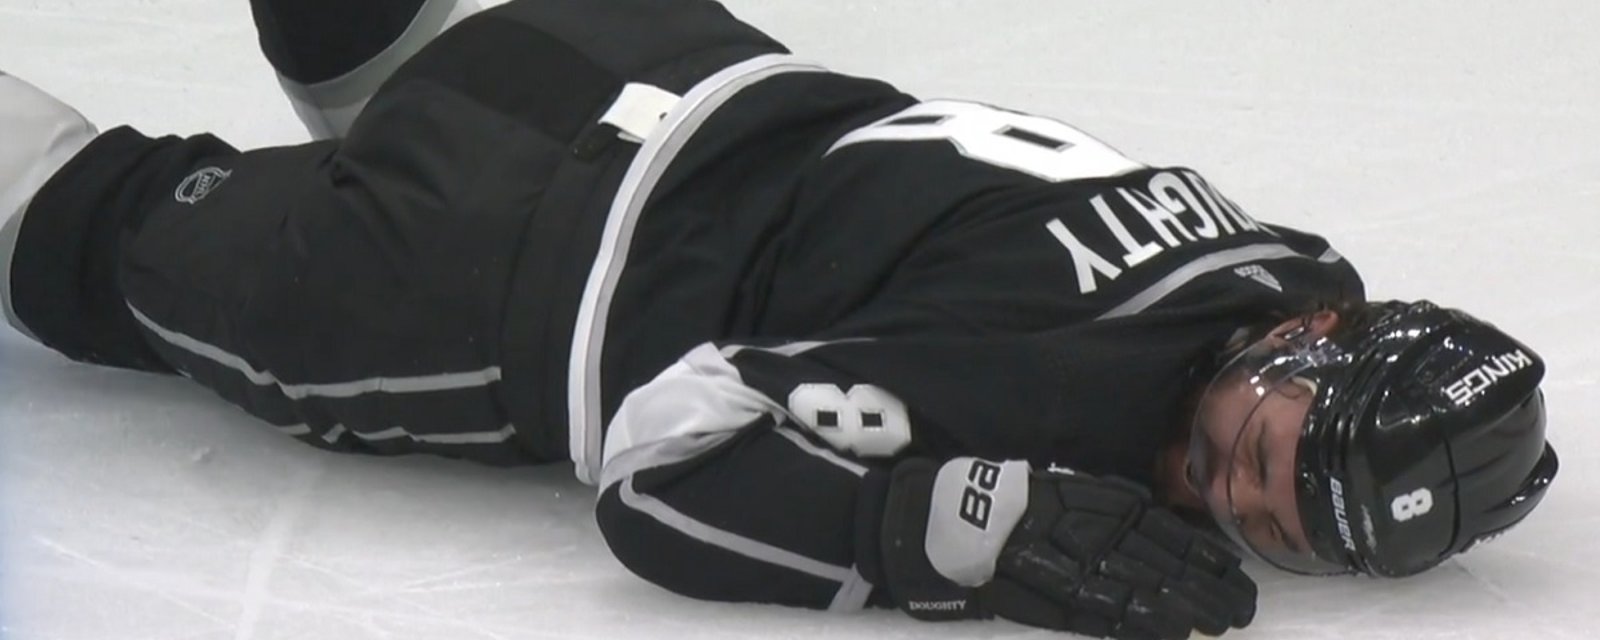 Doughty called out for being a Hollywood actor after brutal dive on Friday night.